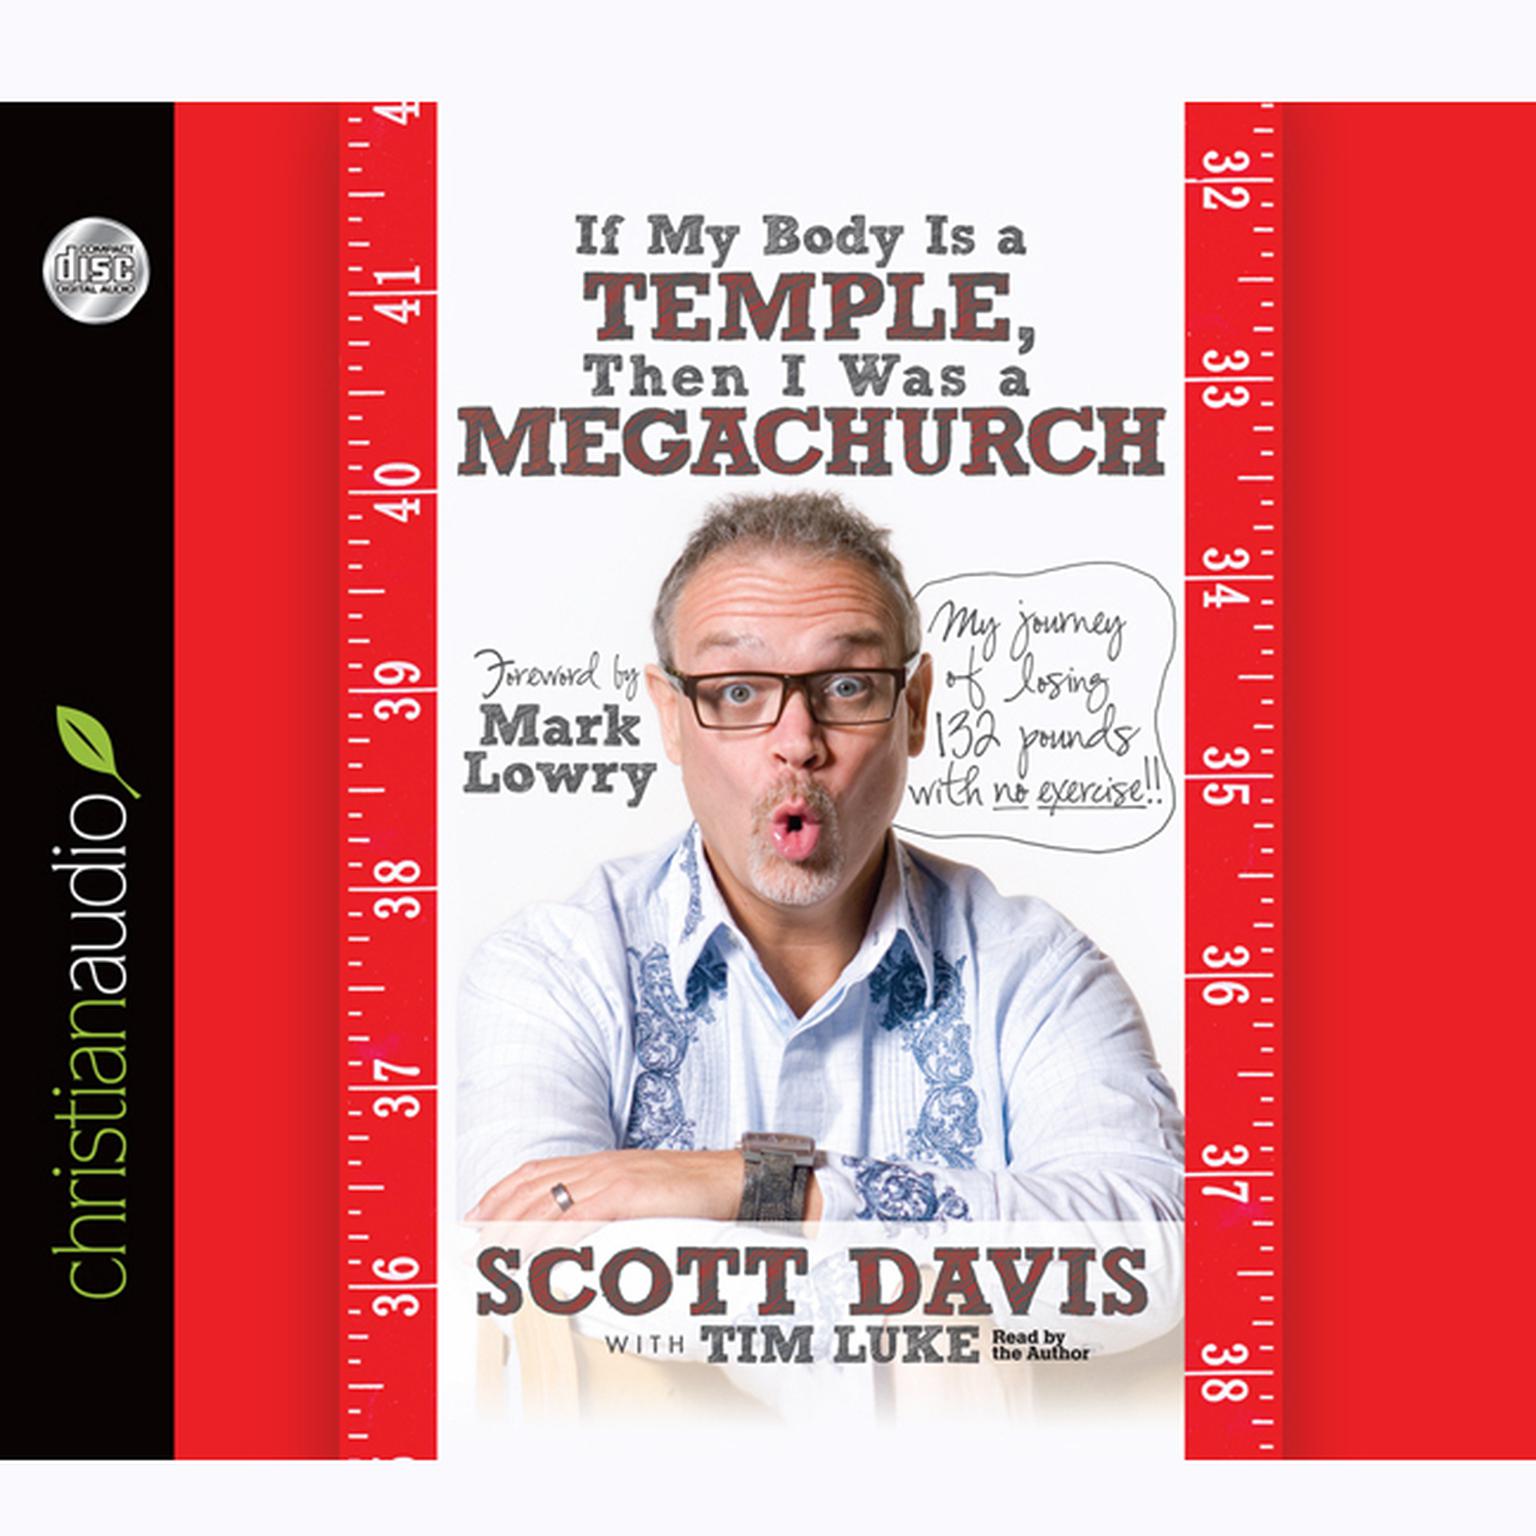 If My Body is a Temple, Then I Was a Megachurch: My journey of losing 132 pounds with no excercise Audiobook, by Scott Davis